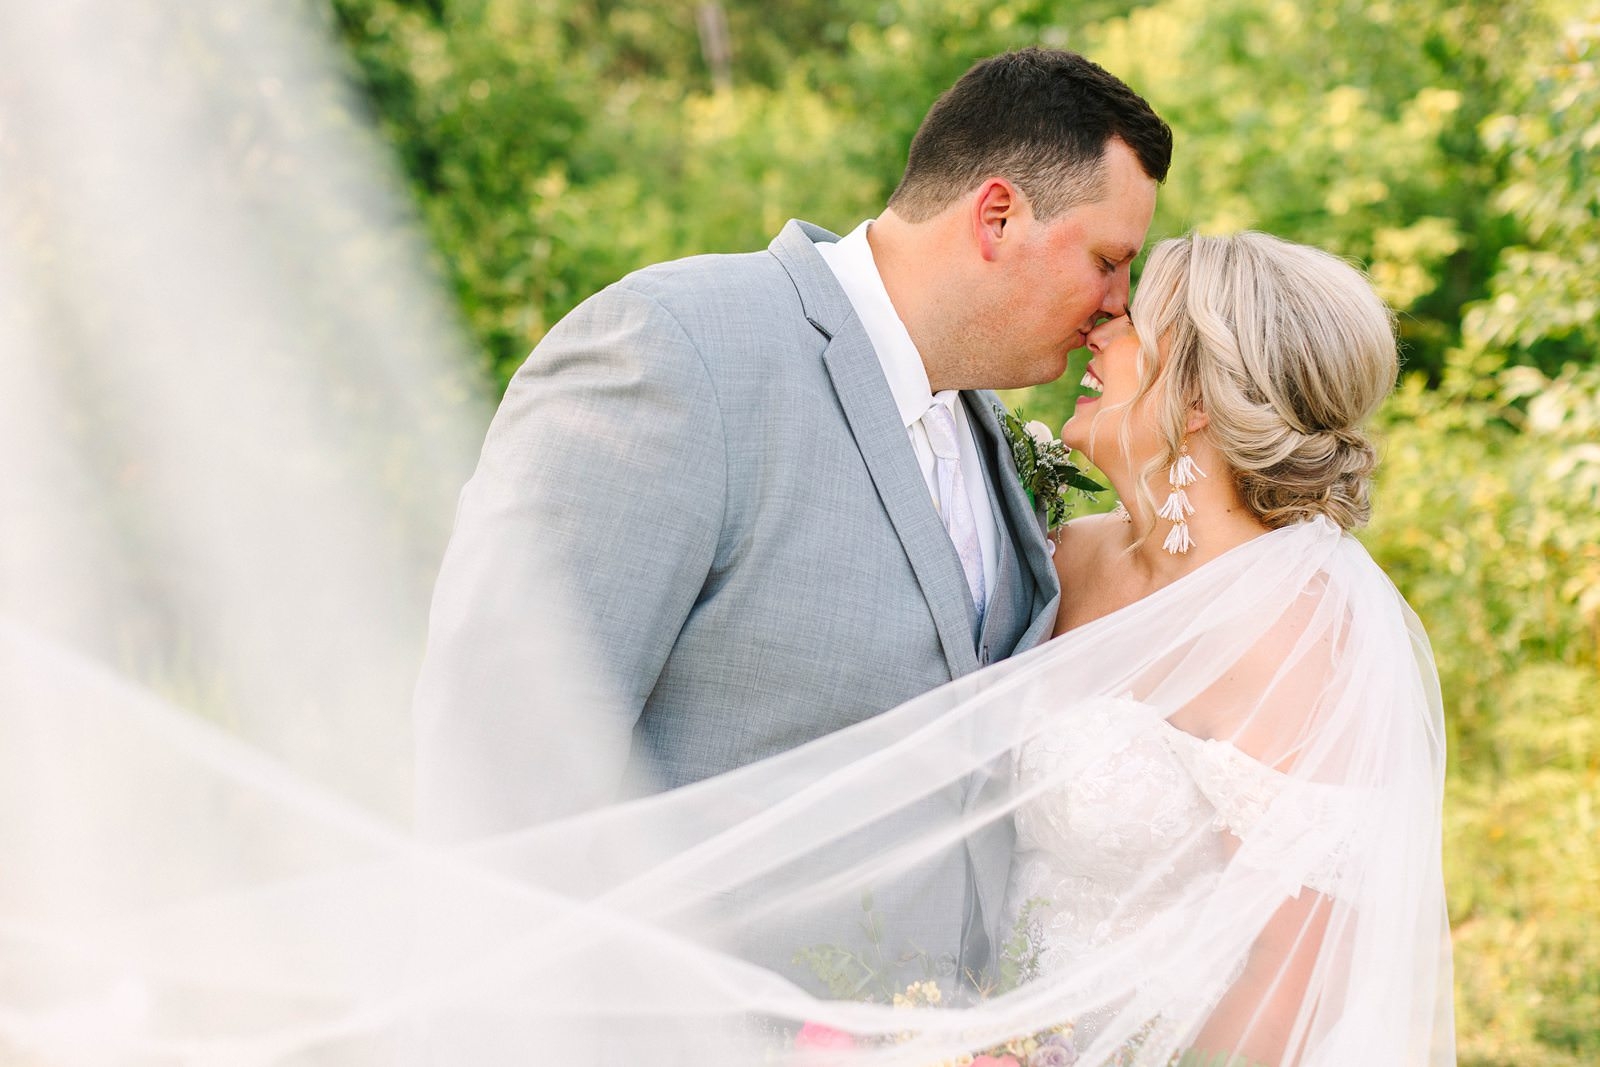 A Sunny Summer Wedding at Friedman Park in Newburgh Indiana | Paige and Dylan | Bret and Brandie Photography151.jpg